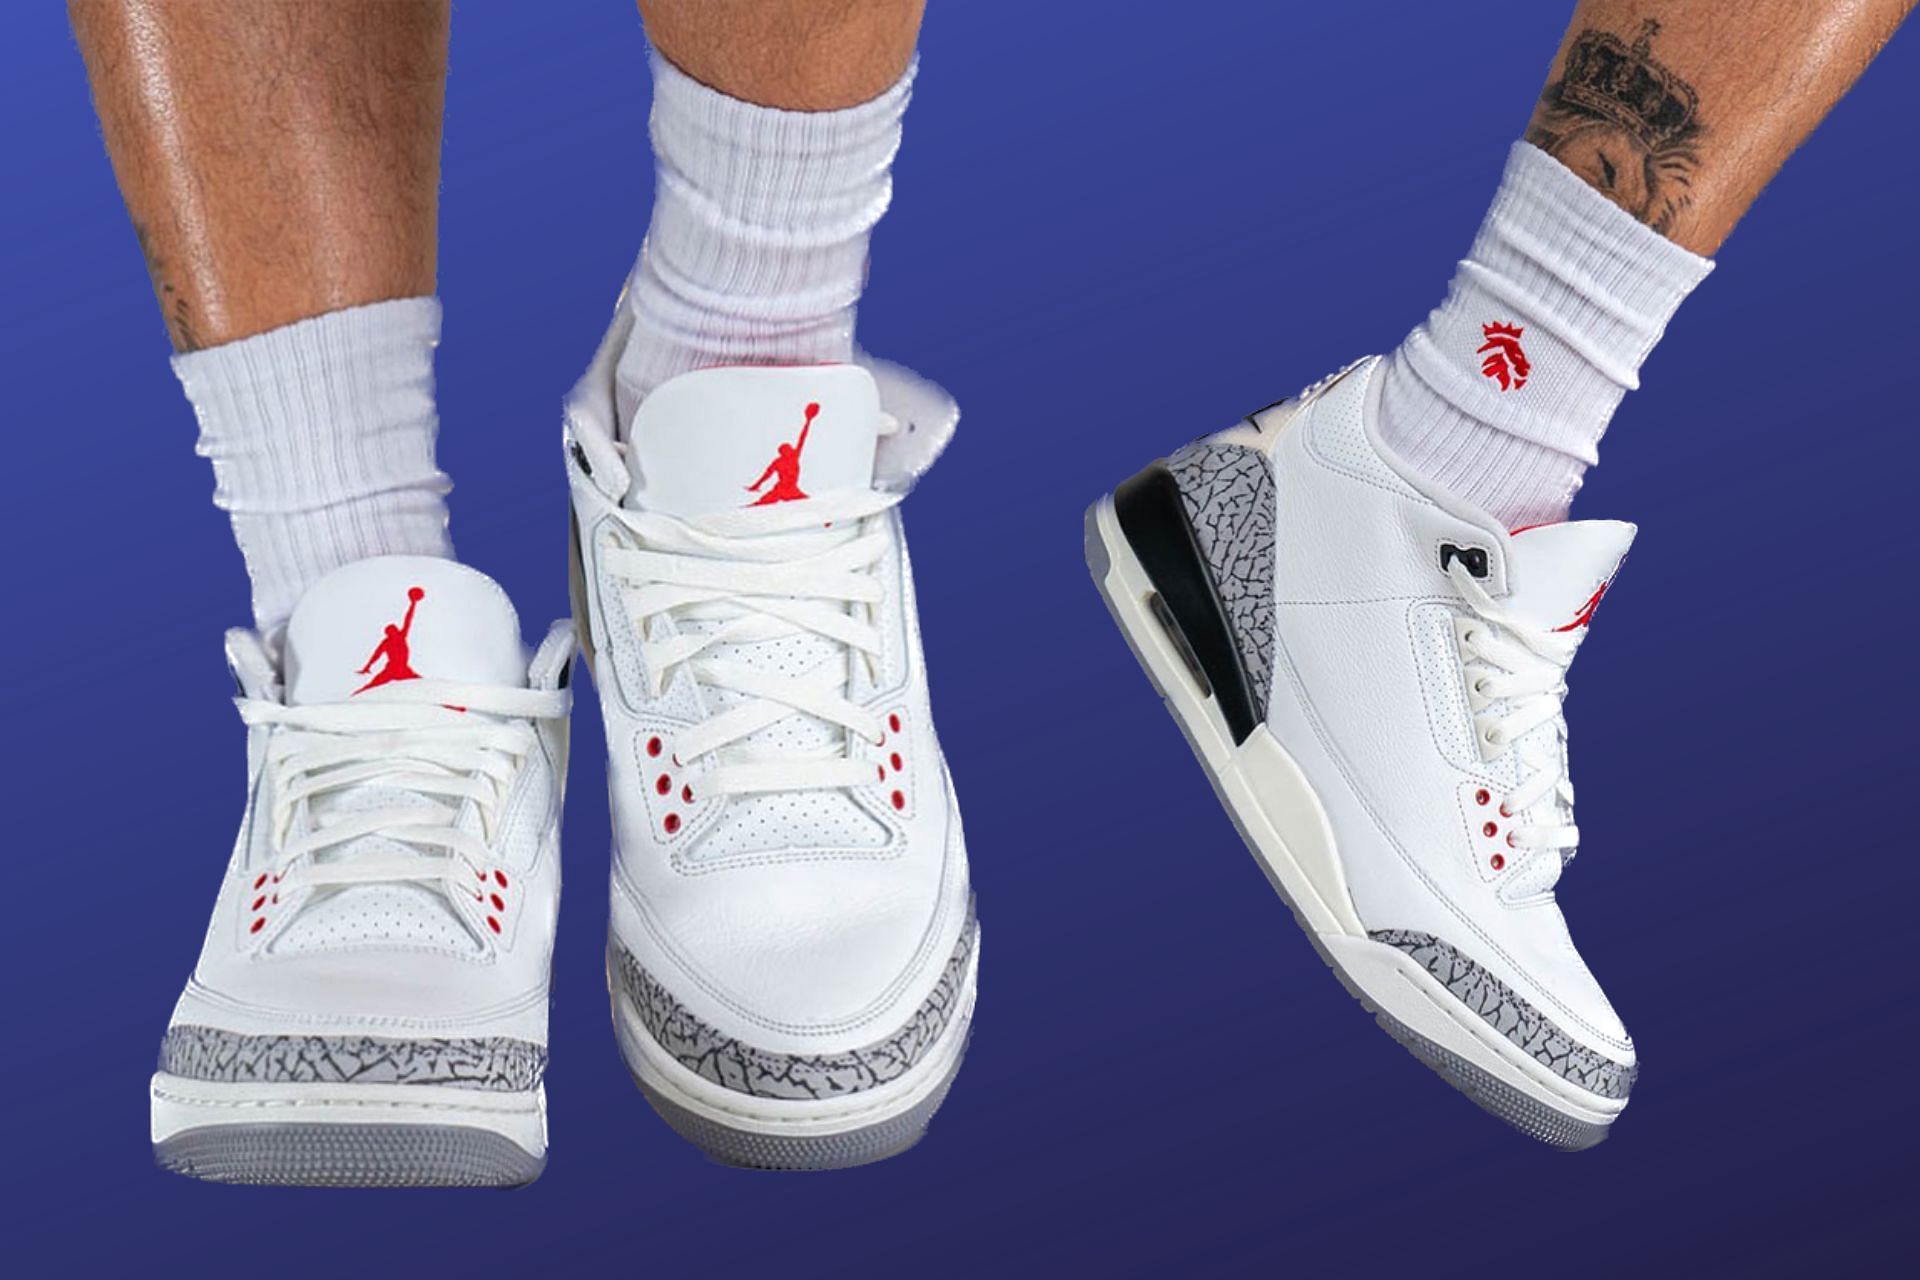 Take a look at the on-foot images of the shoes (Image via Sportskeeda)